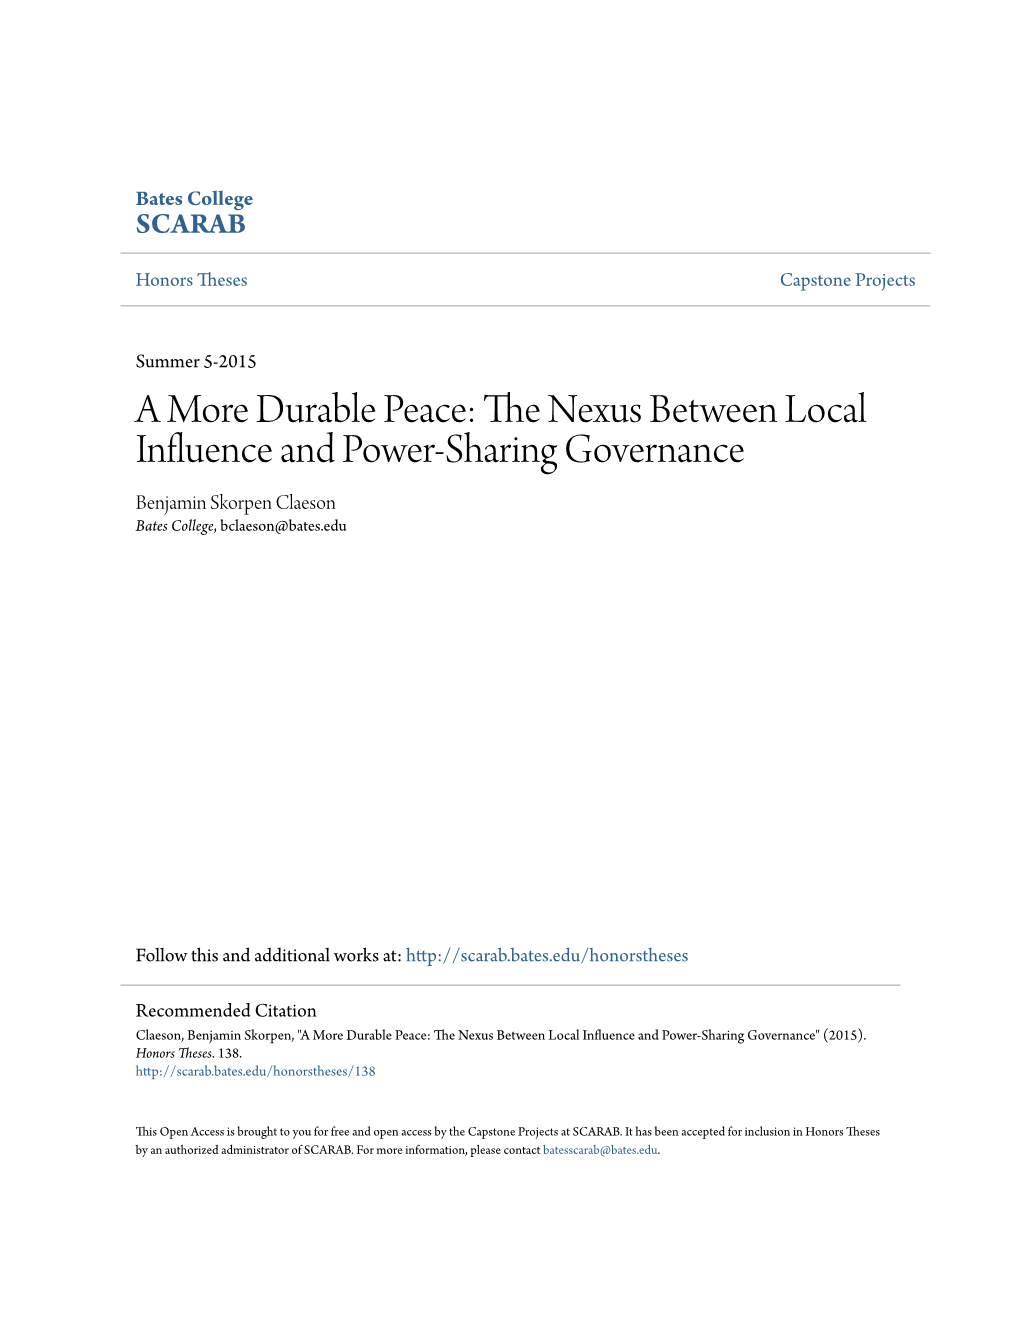 A More Durable Peace: the Exn Us Between Local Influence and Power-Sharing Governance Benjamin Skorpen Claeson Bates College, Bclaeson@Bates.Edu